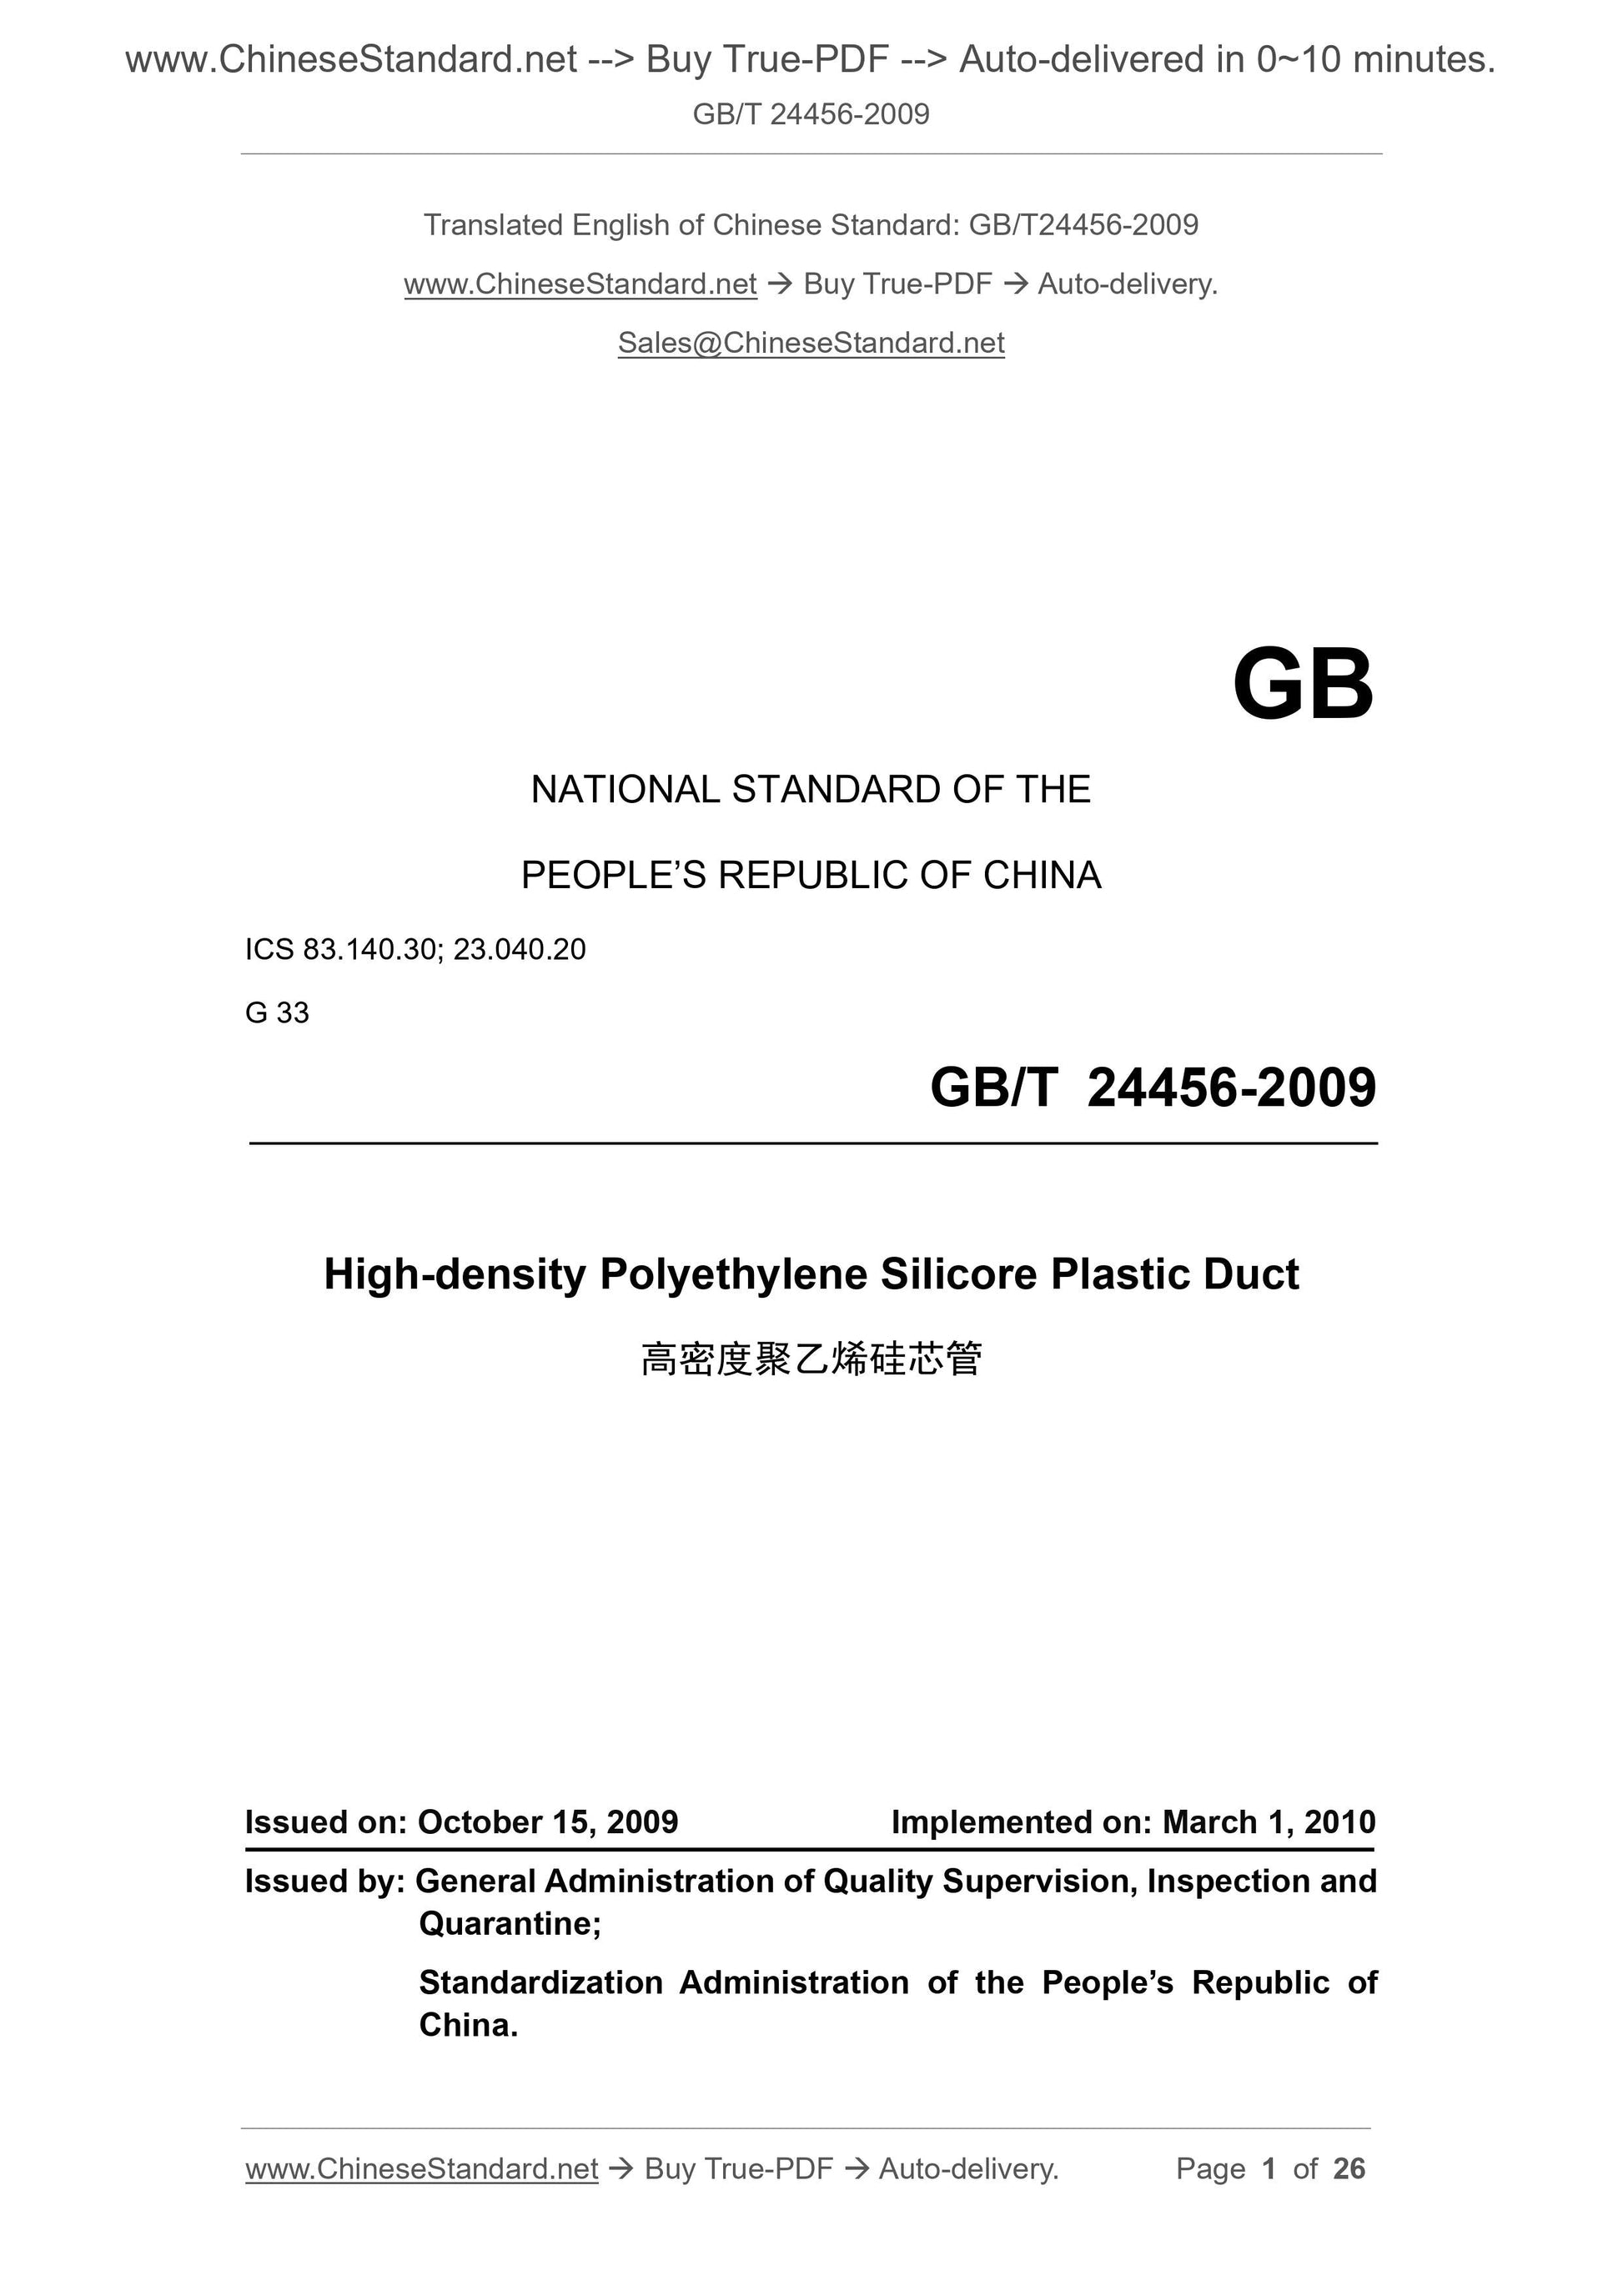 GB/T 24456-2009 Page 1